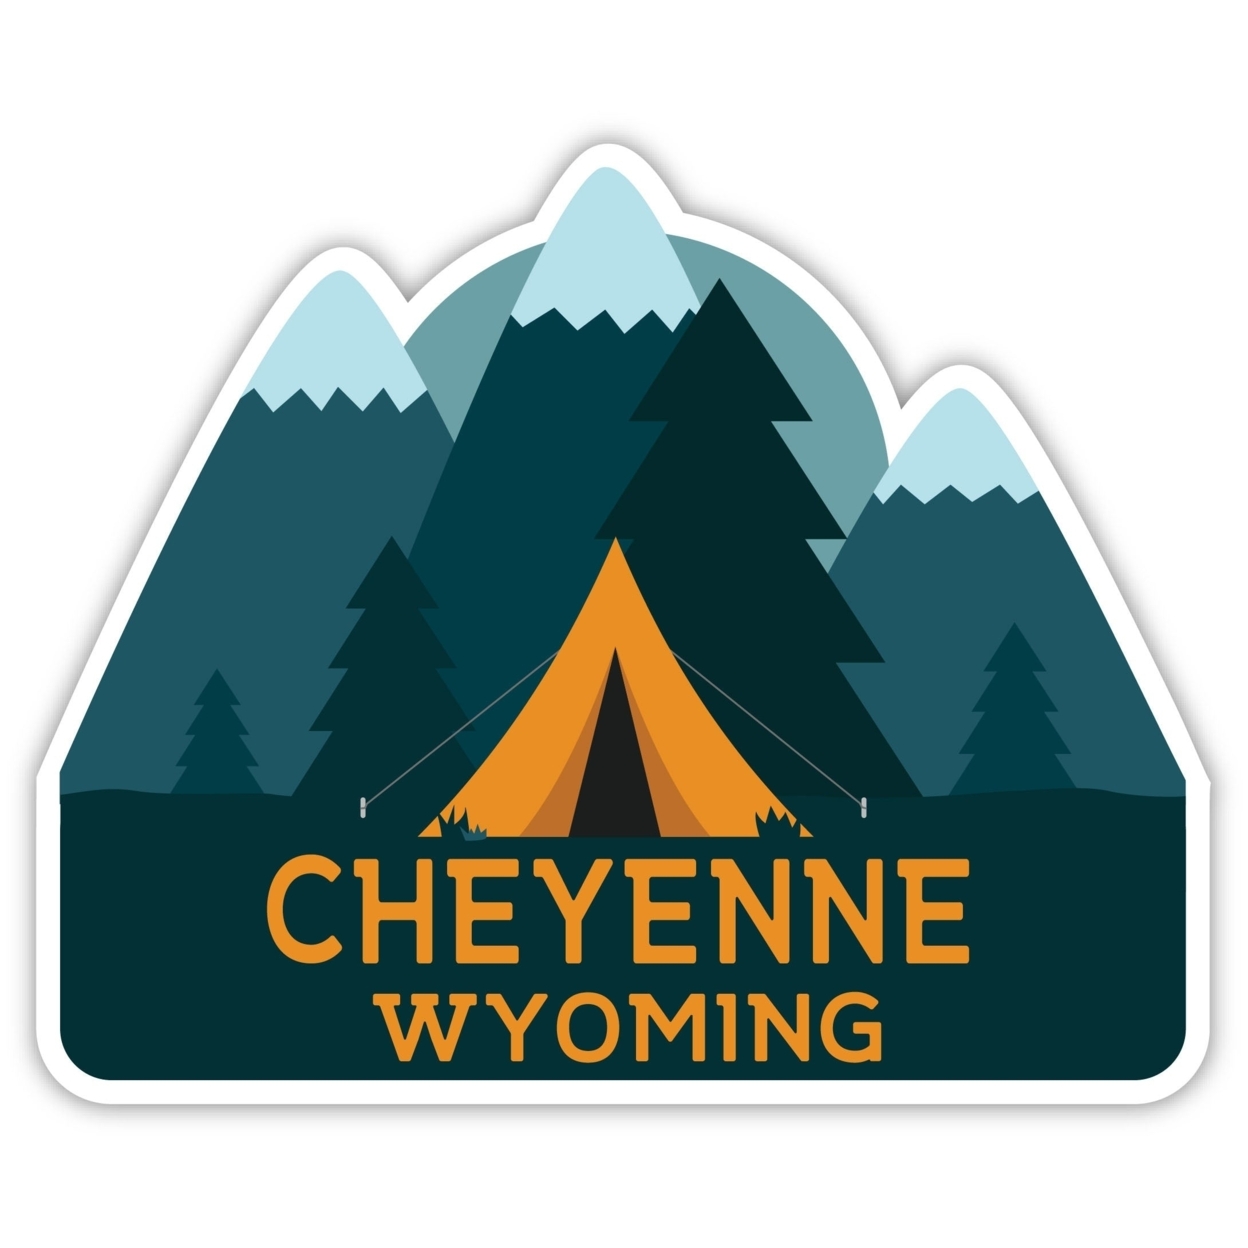 Cheyenne Wyoming Souvenir Decorative Stickers (Choose Theme And Size) - 4-Pack, 10-Inch, Tent